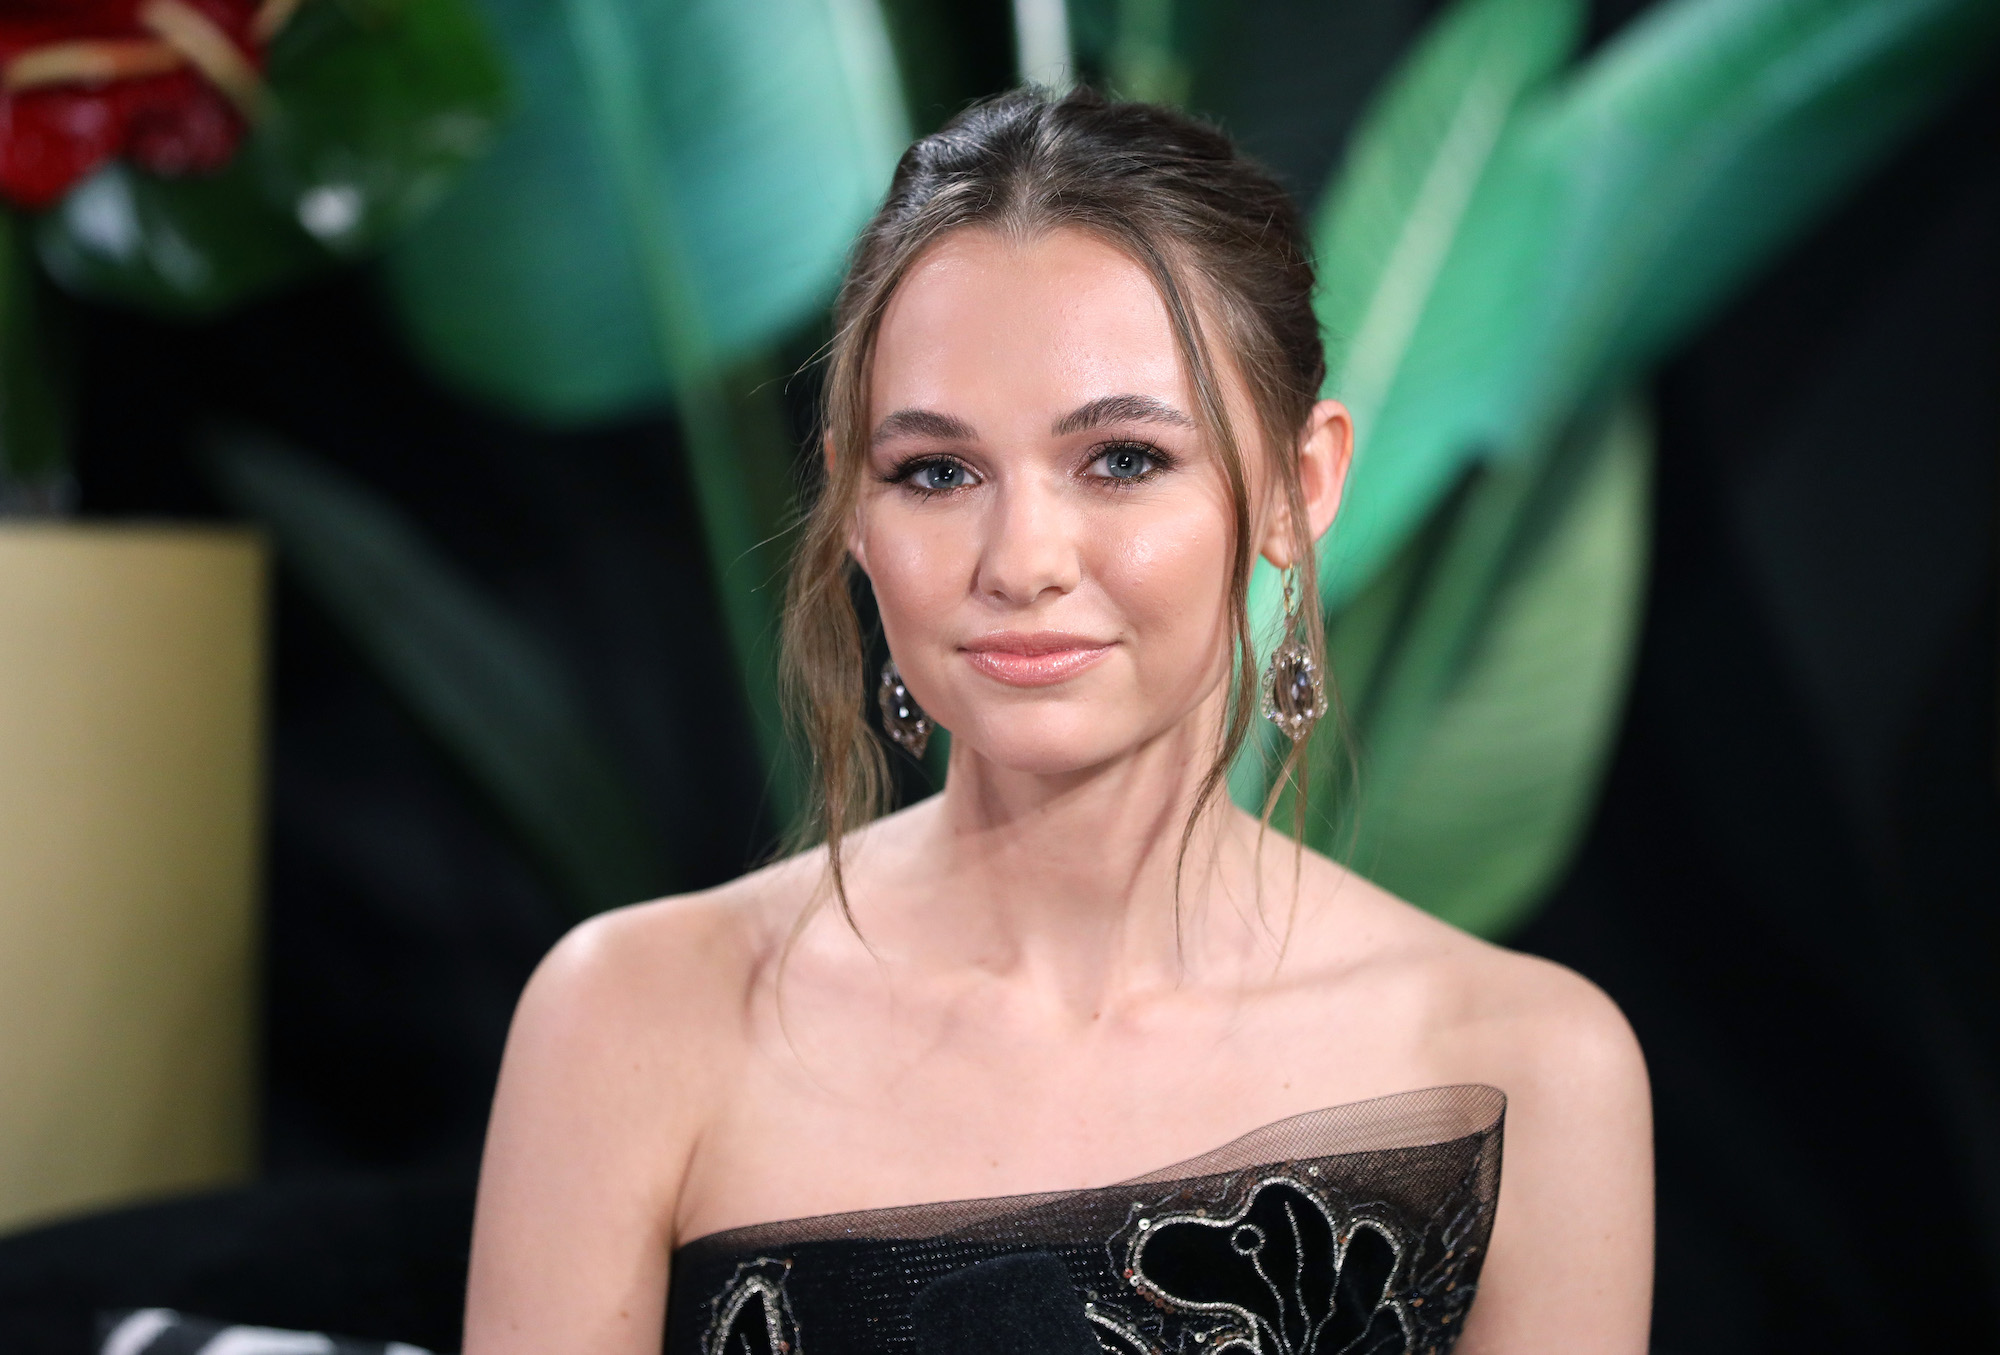 Madison Iseman wearing a black dress to IMDb LIVE Presented By M&M'S At The Elton John AIDS Foundation Academy Awards Viewing Party.